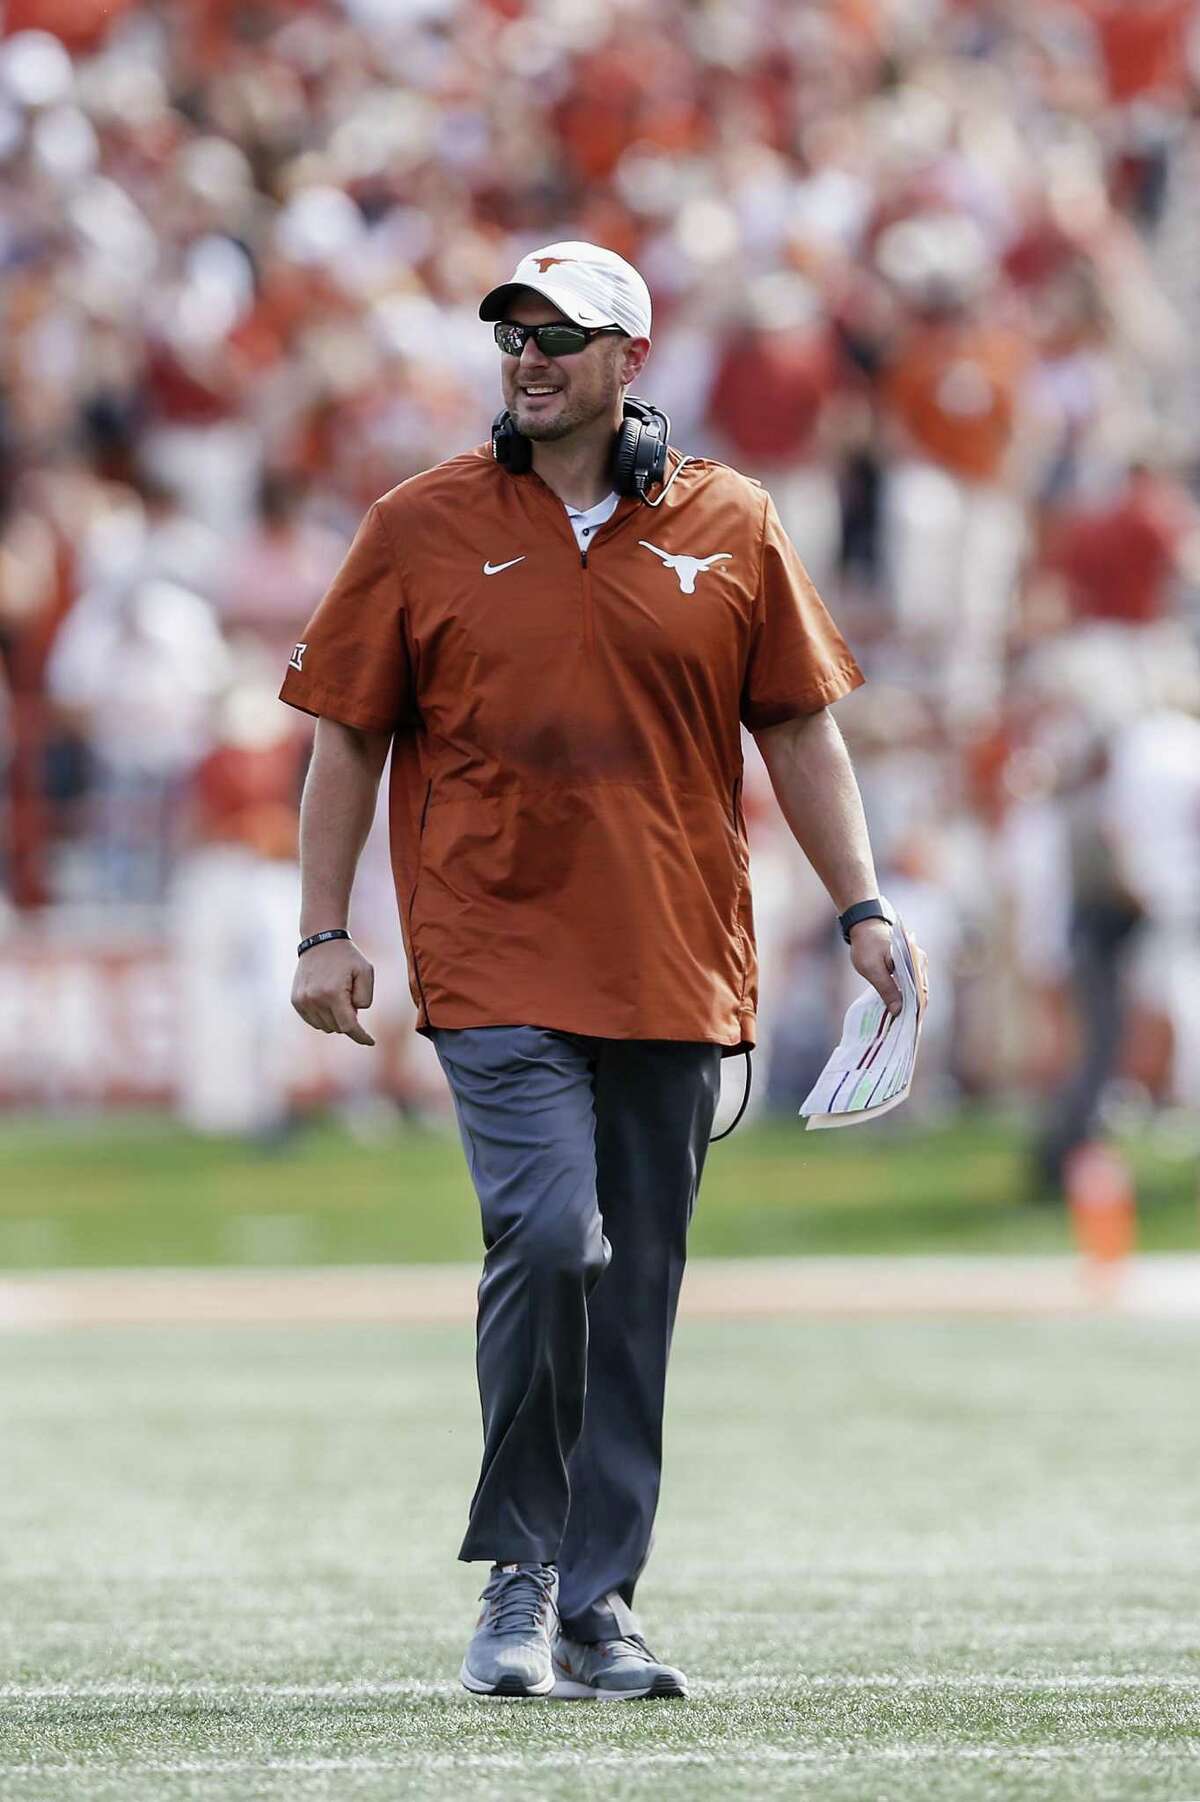 UT coach Tom Herman reminded his players after an opening loss “that this one game will not define us.” And six straight wins later — so far, so good.